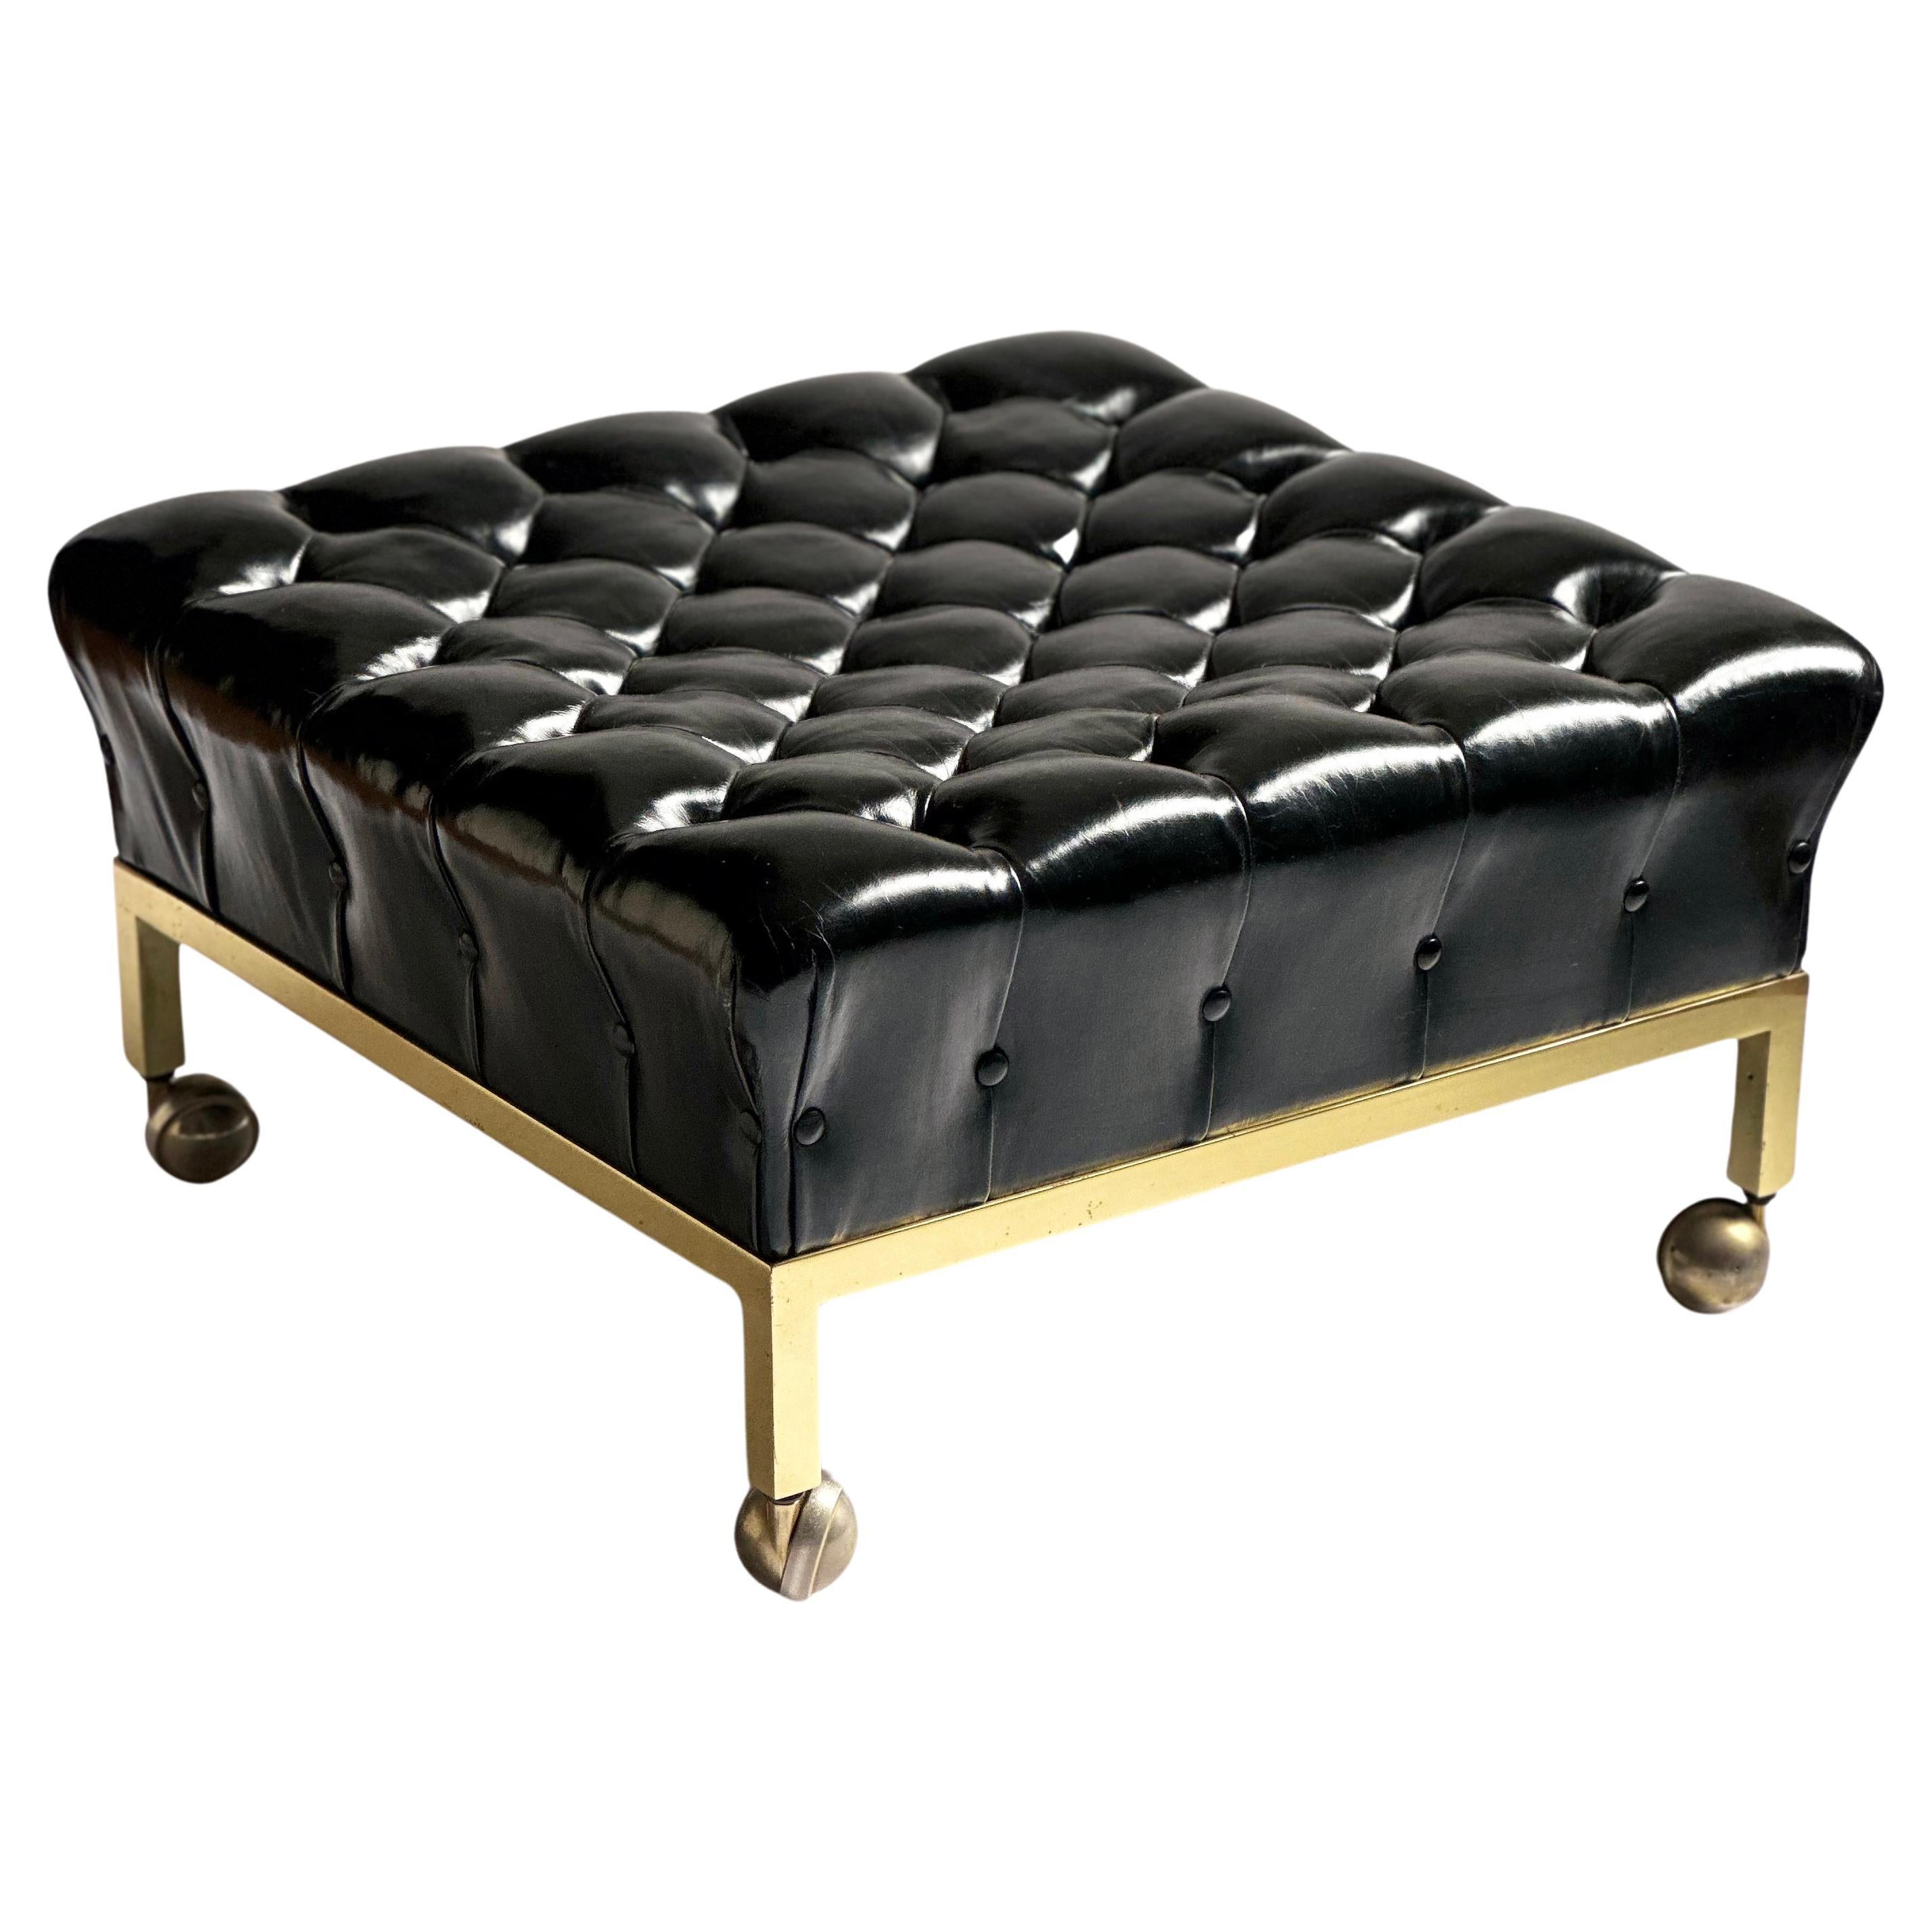 Brass Framed Biscuit Tufted Ottoman in Original Black Leather by Harvey Probber